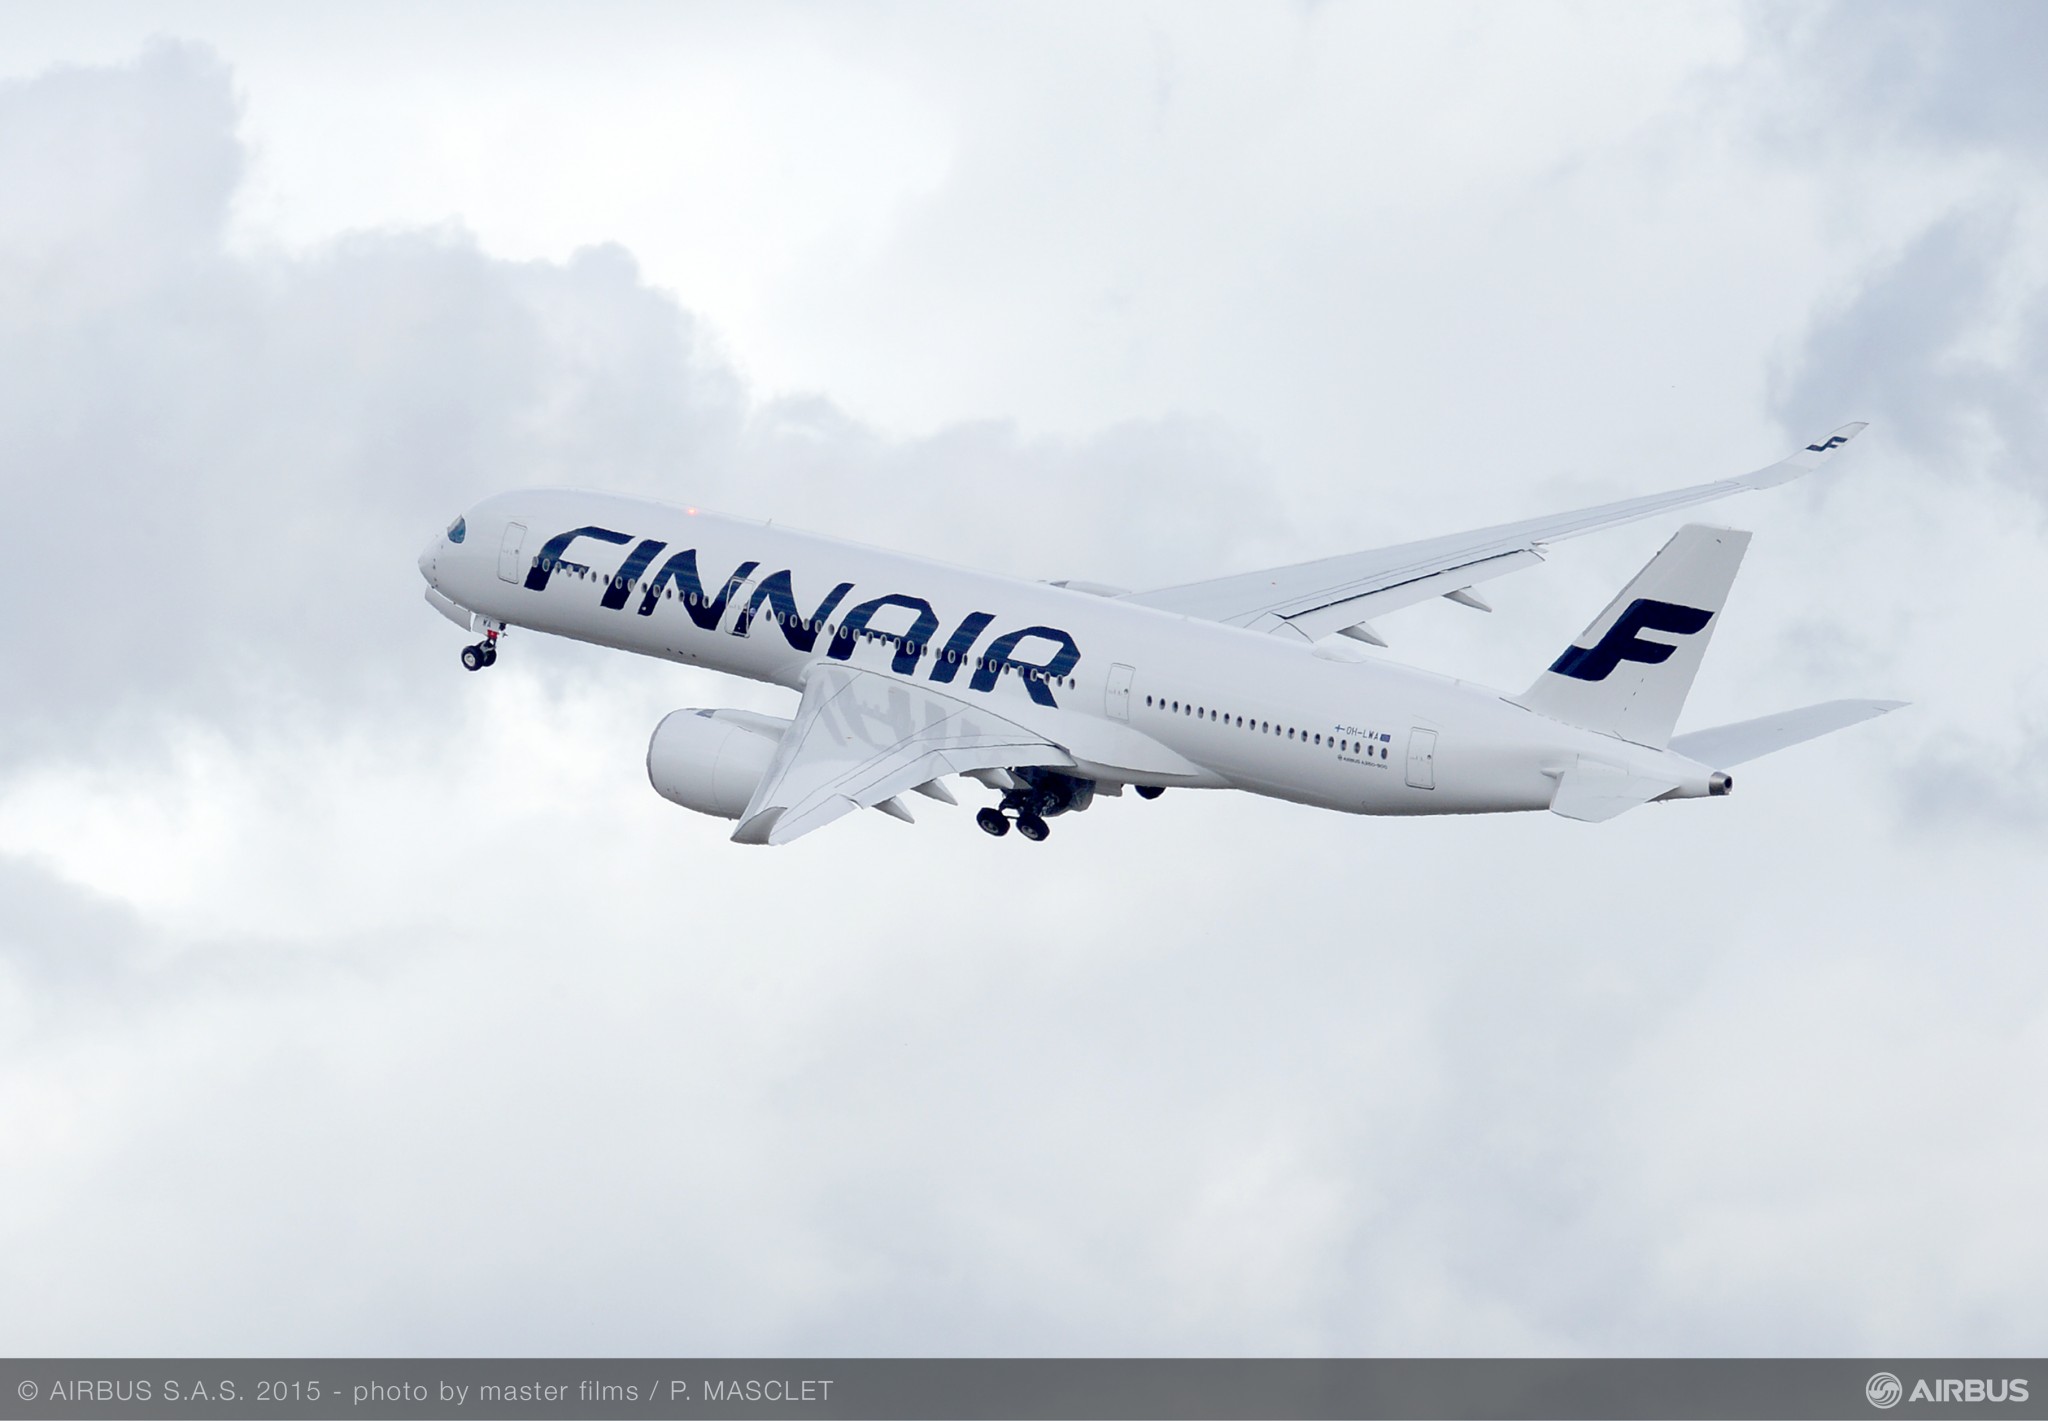 Finnair increase cargo and passenger traffic in May 